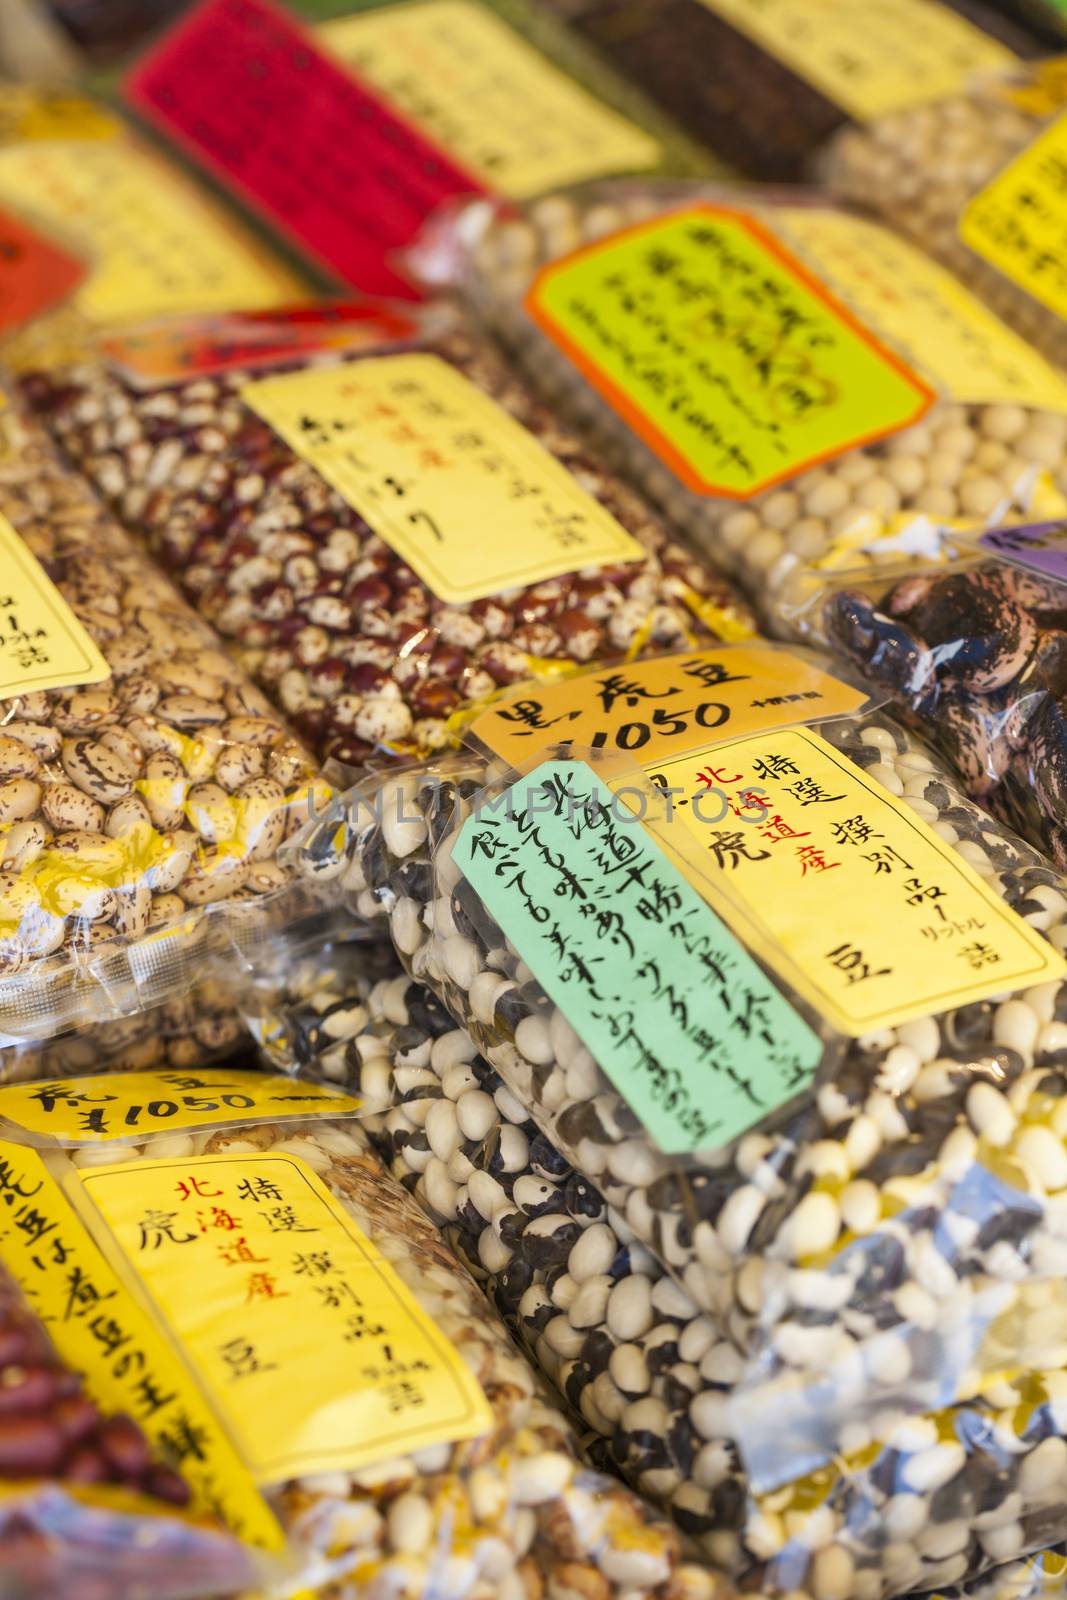 Sale of Japanese traditional products